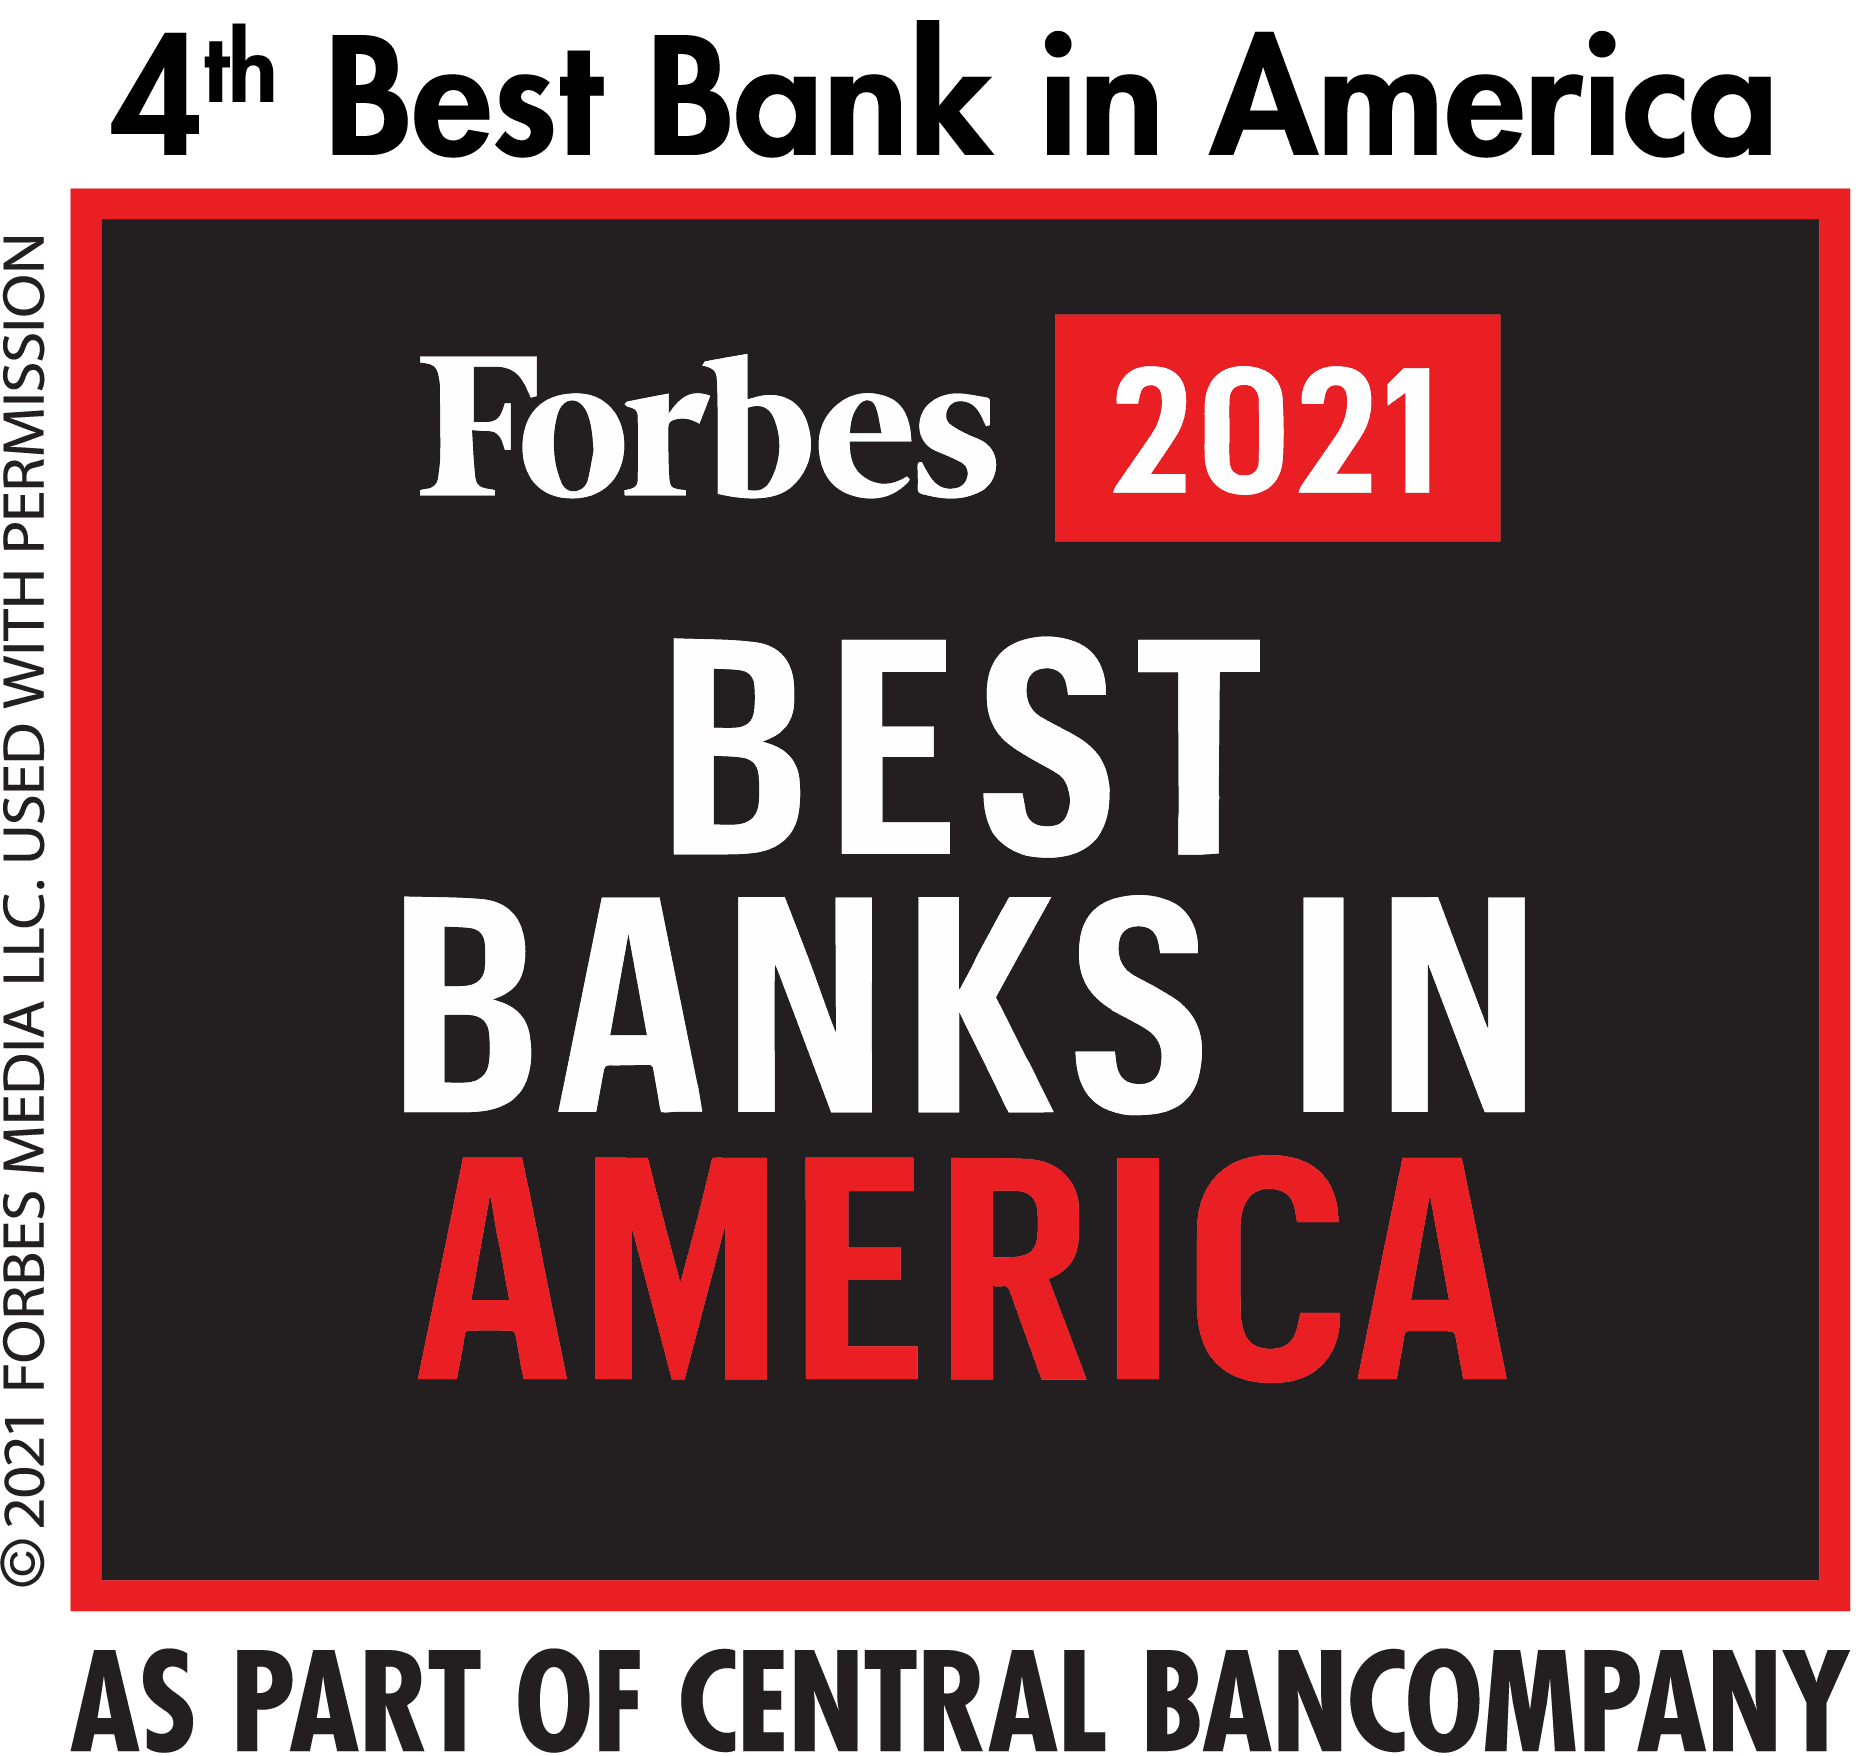 Central Bancompany is Forbes' 4th Best Bank in America.